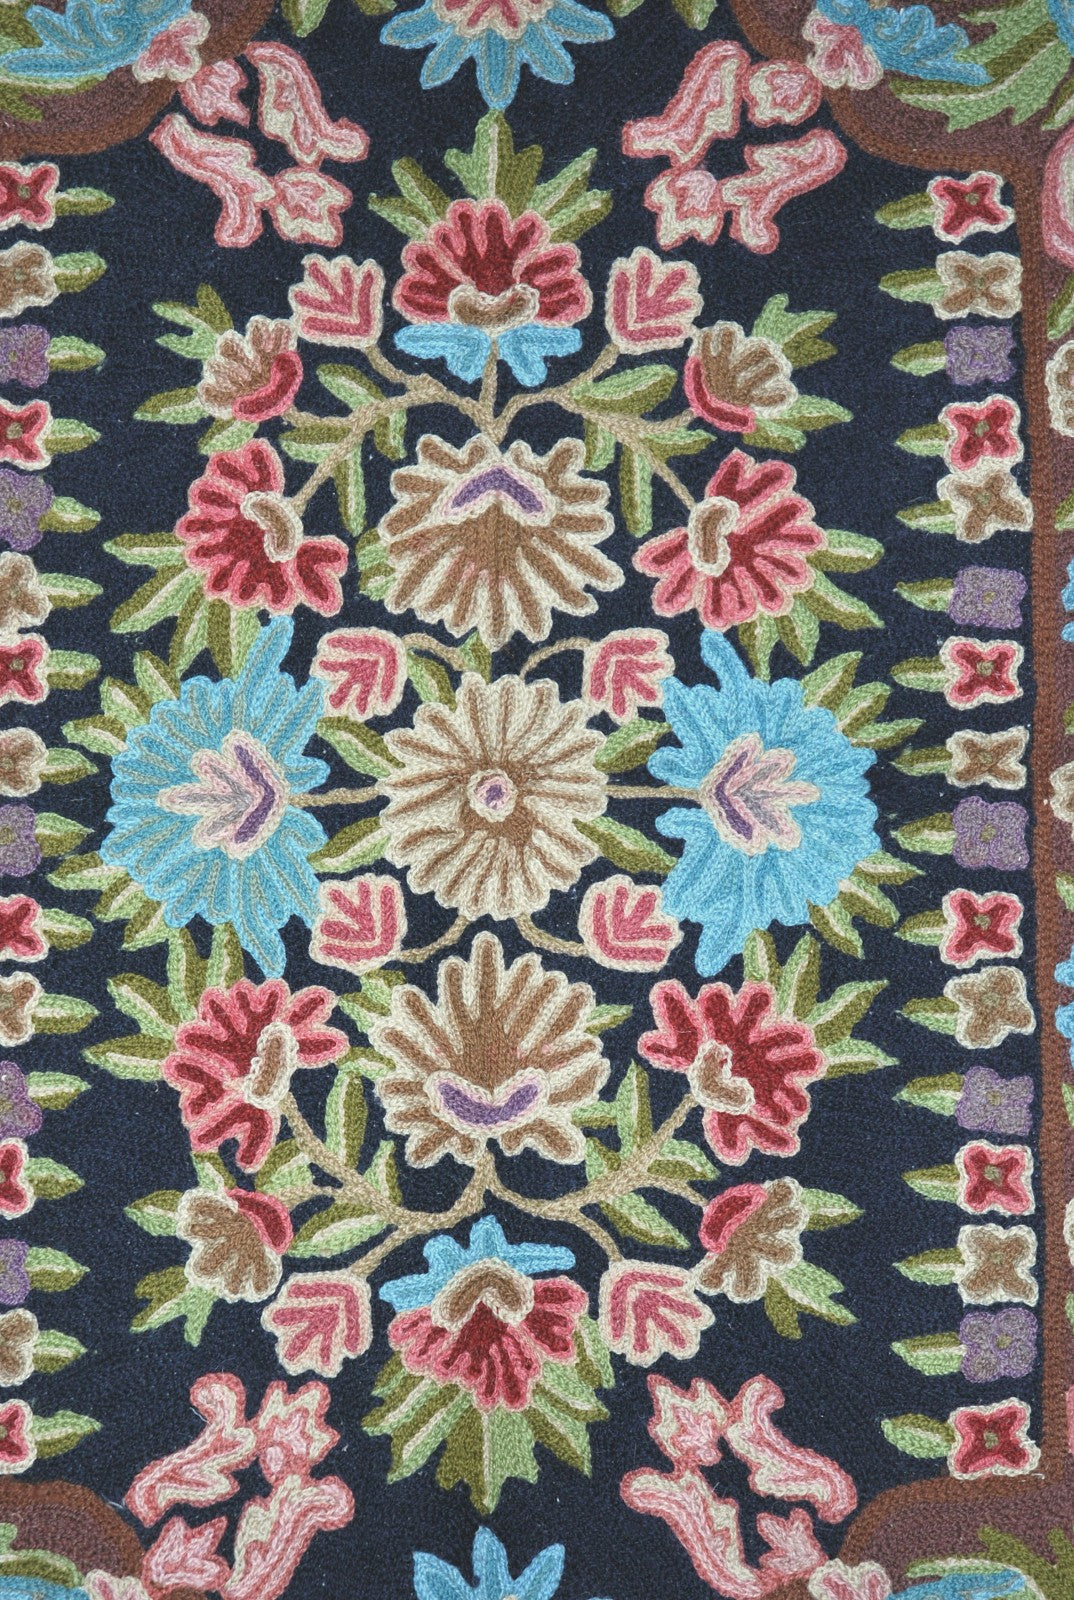 ChainStitch Tapestry Wall Hanging Area Rug, Multicolor Embroidery 2x3 feet #CWR6106